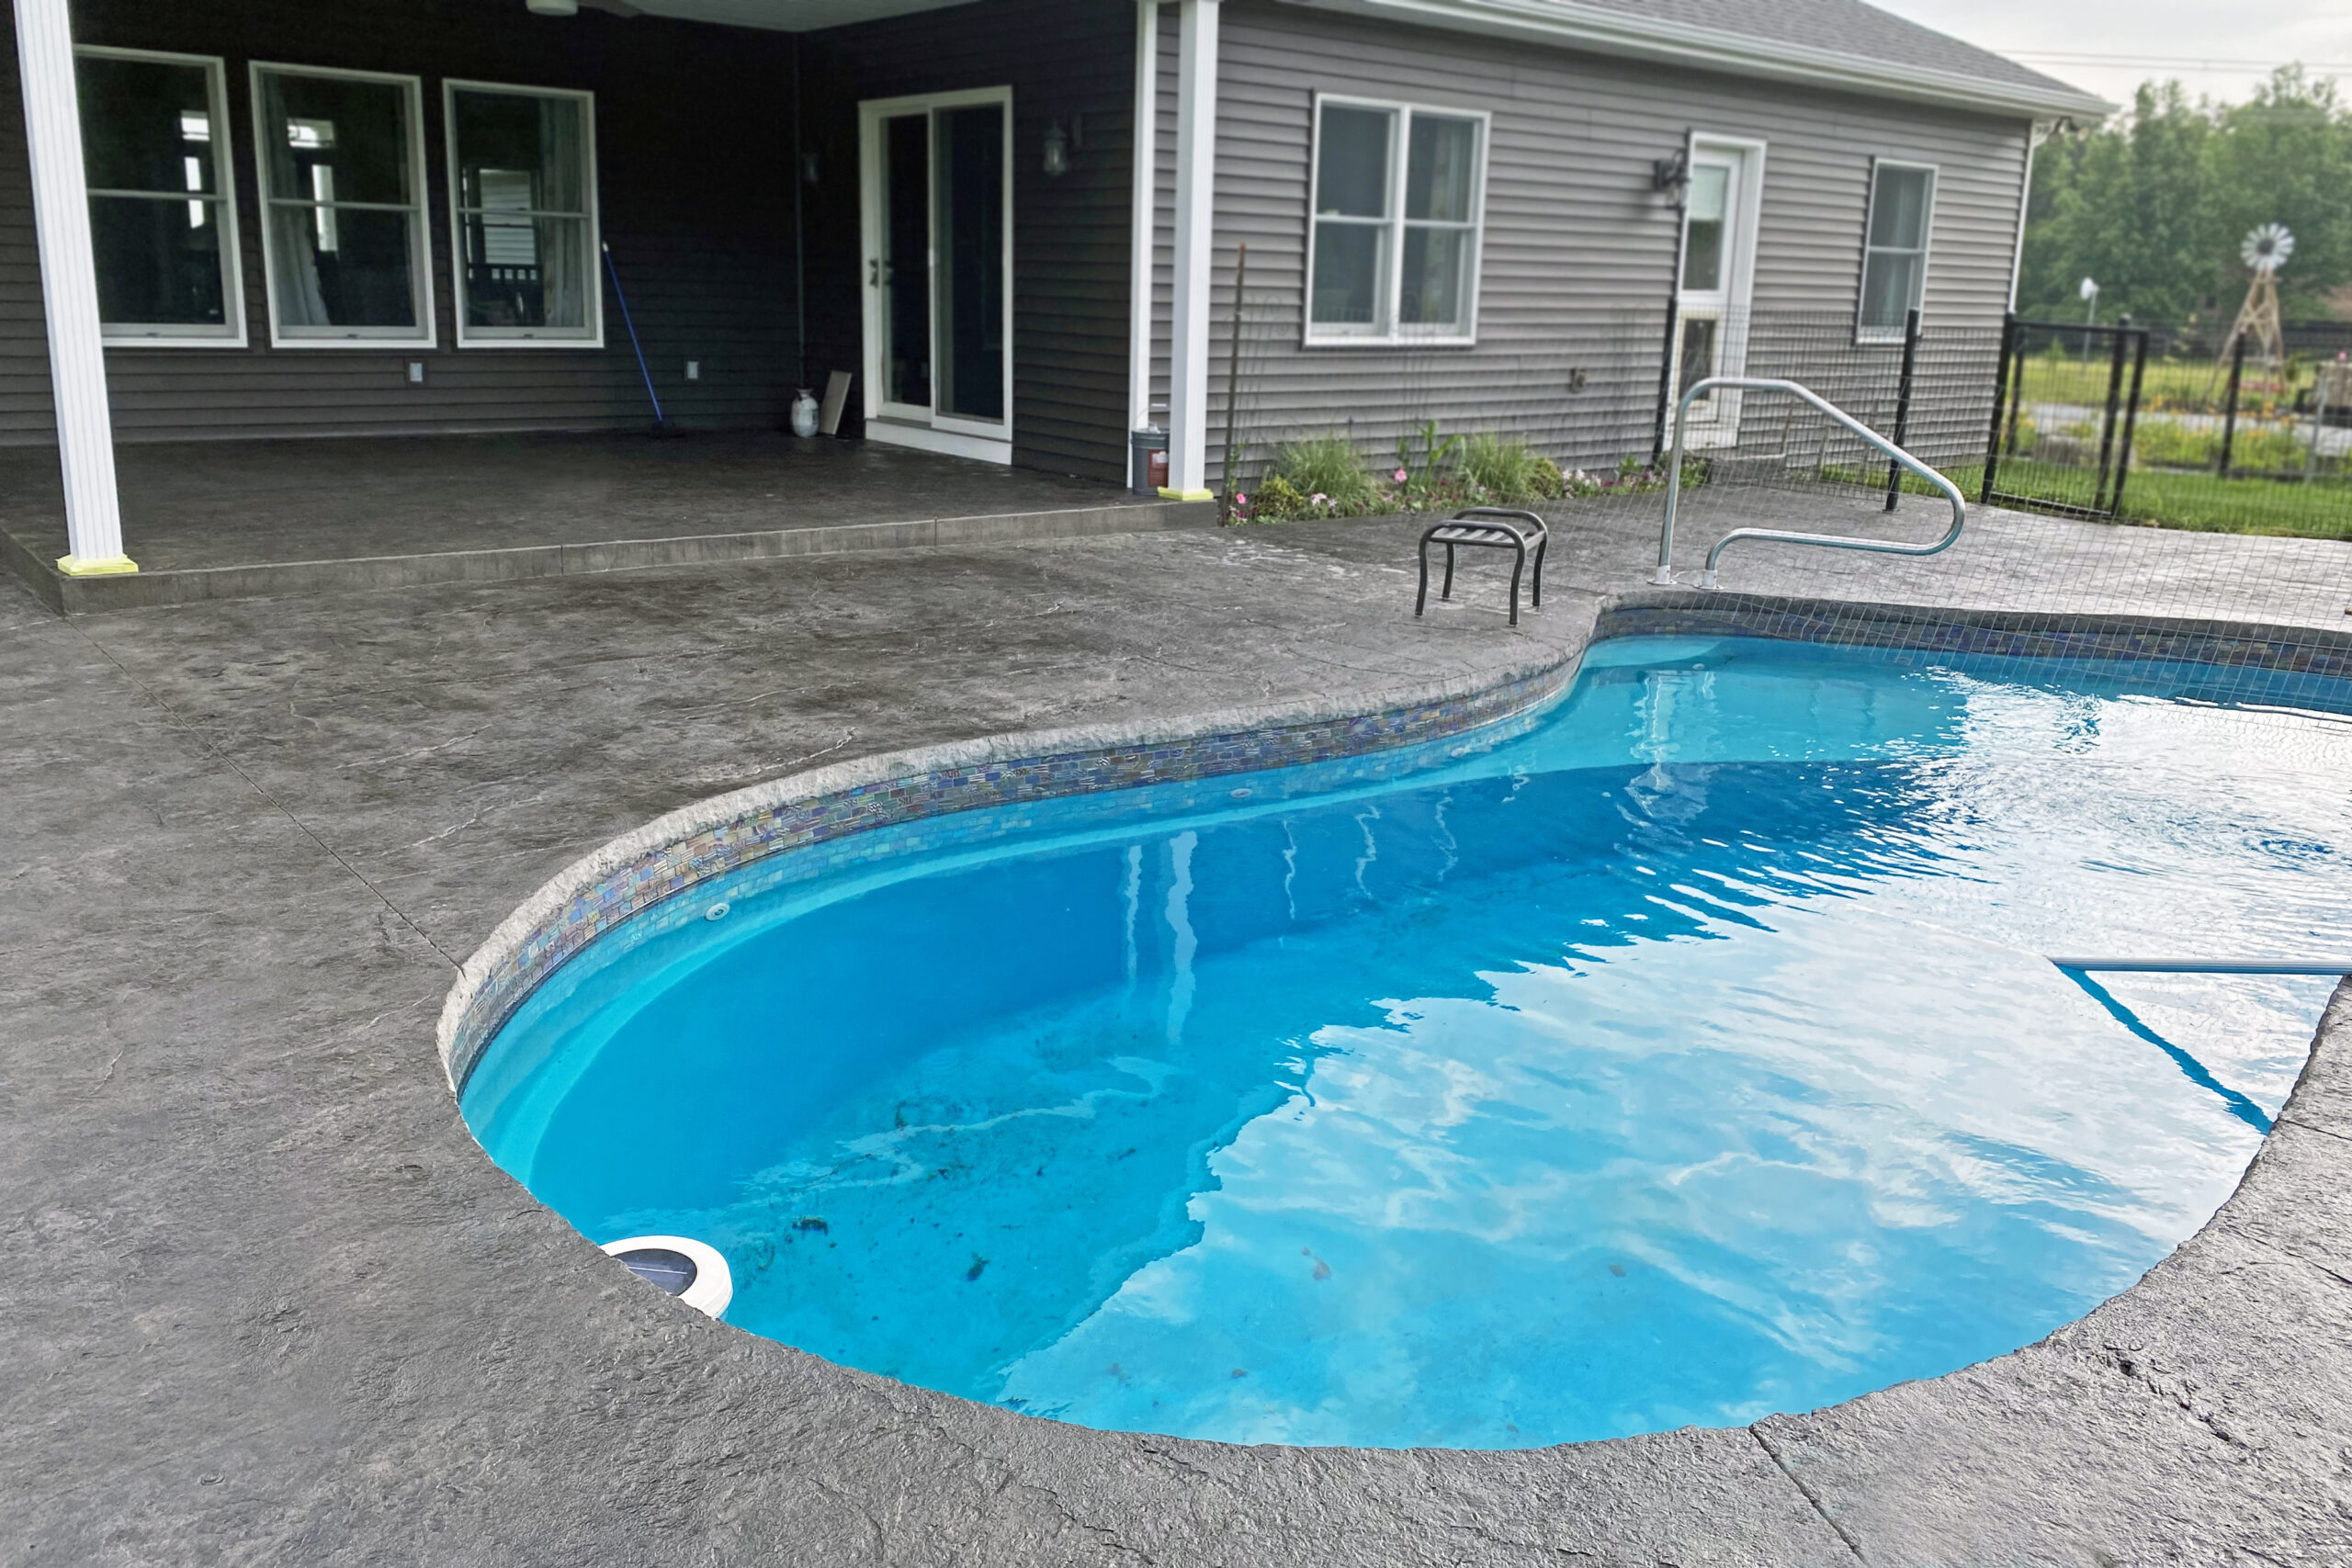 Rejuvenated stamped concrete pool area after application of Black Antiquing stain and EasySeal high gloss sealer.